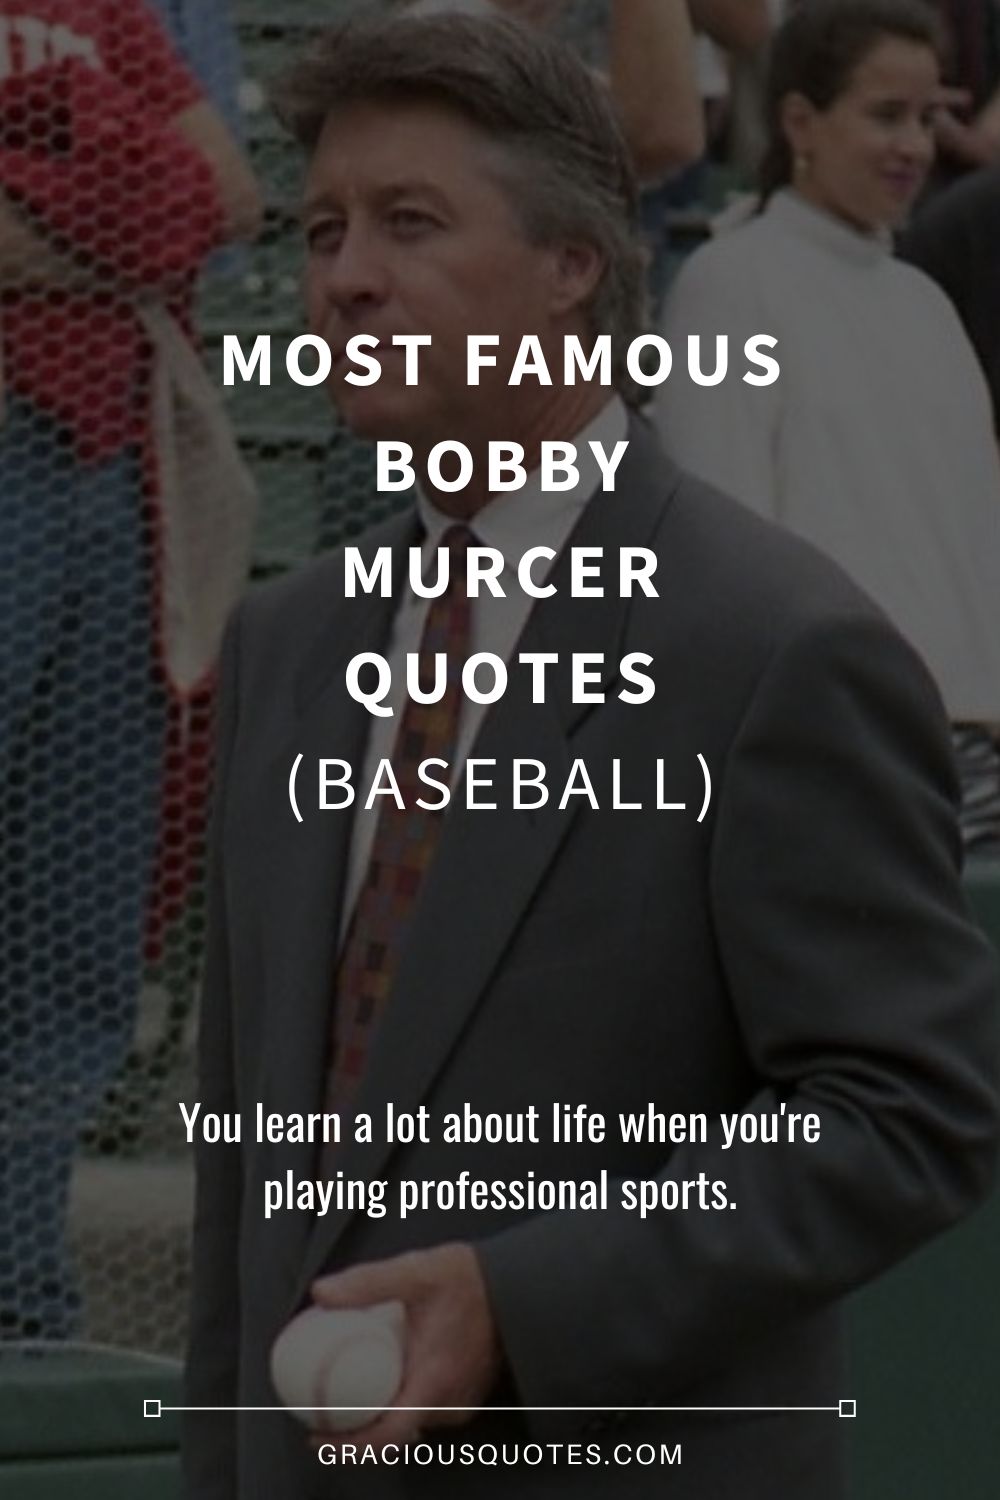 10 Bobby Murcer, #2 on his back, #1 in our hearts ideas